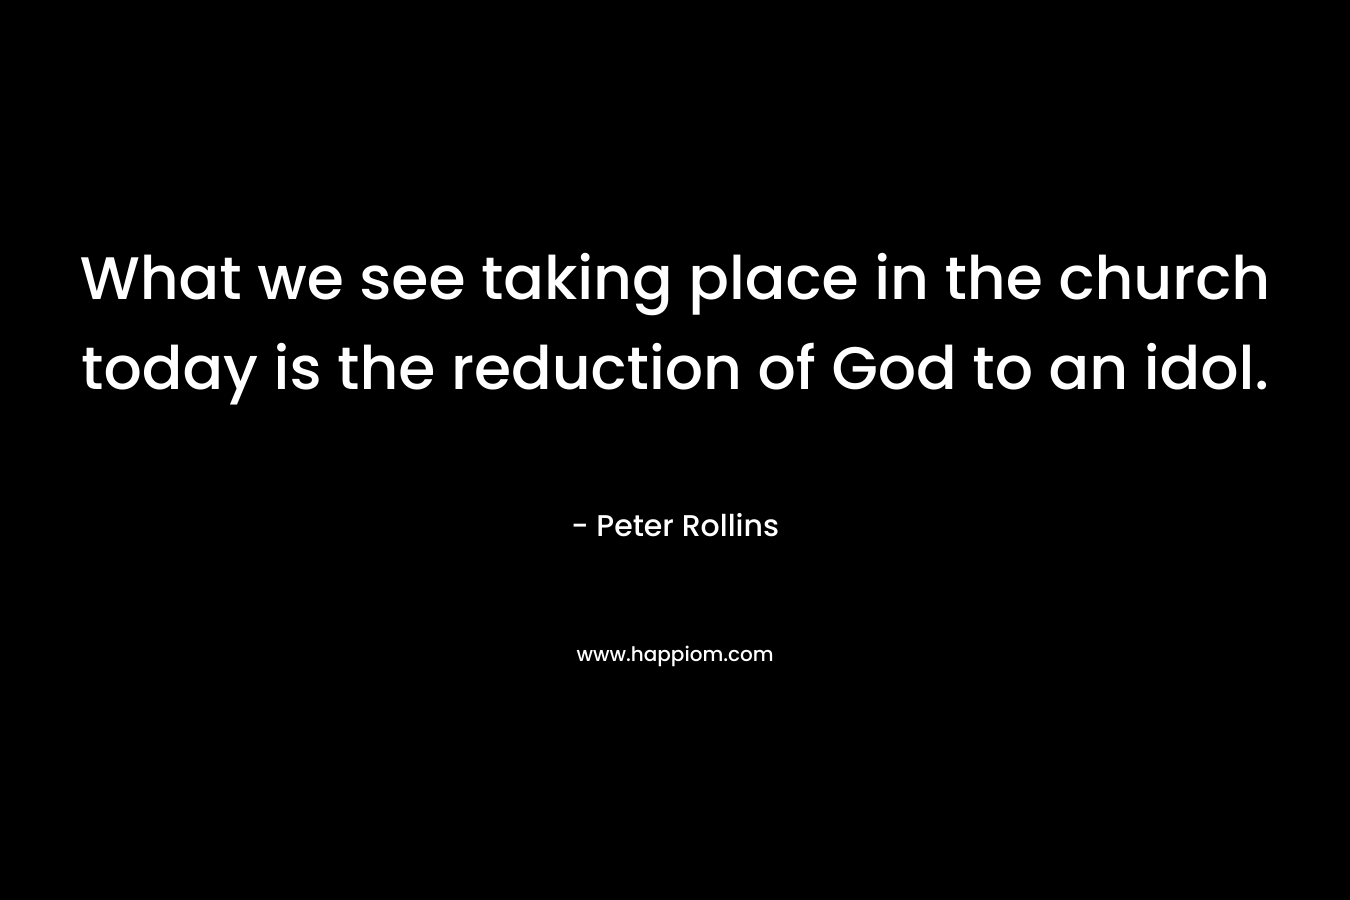 What we see taking place in the church today is the reduction of God to an idol. – Peter Rollins